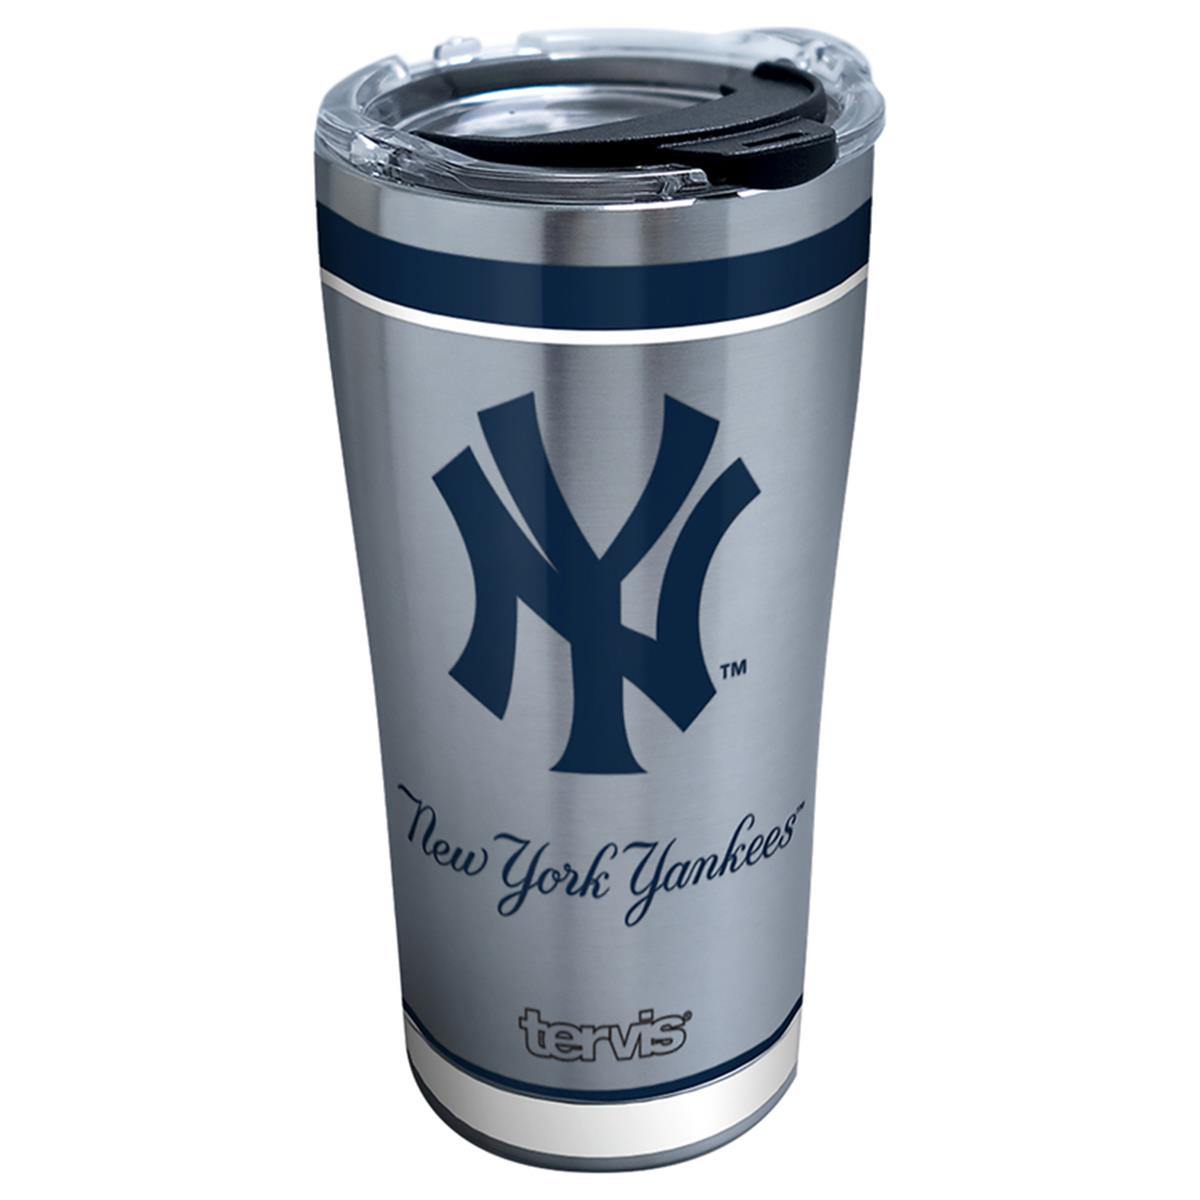 Picture of Tervis 8053131 20 oz Major League Baseball New York Yankees Multi Color BPA Free Double Wall Tumbler